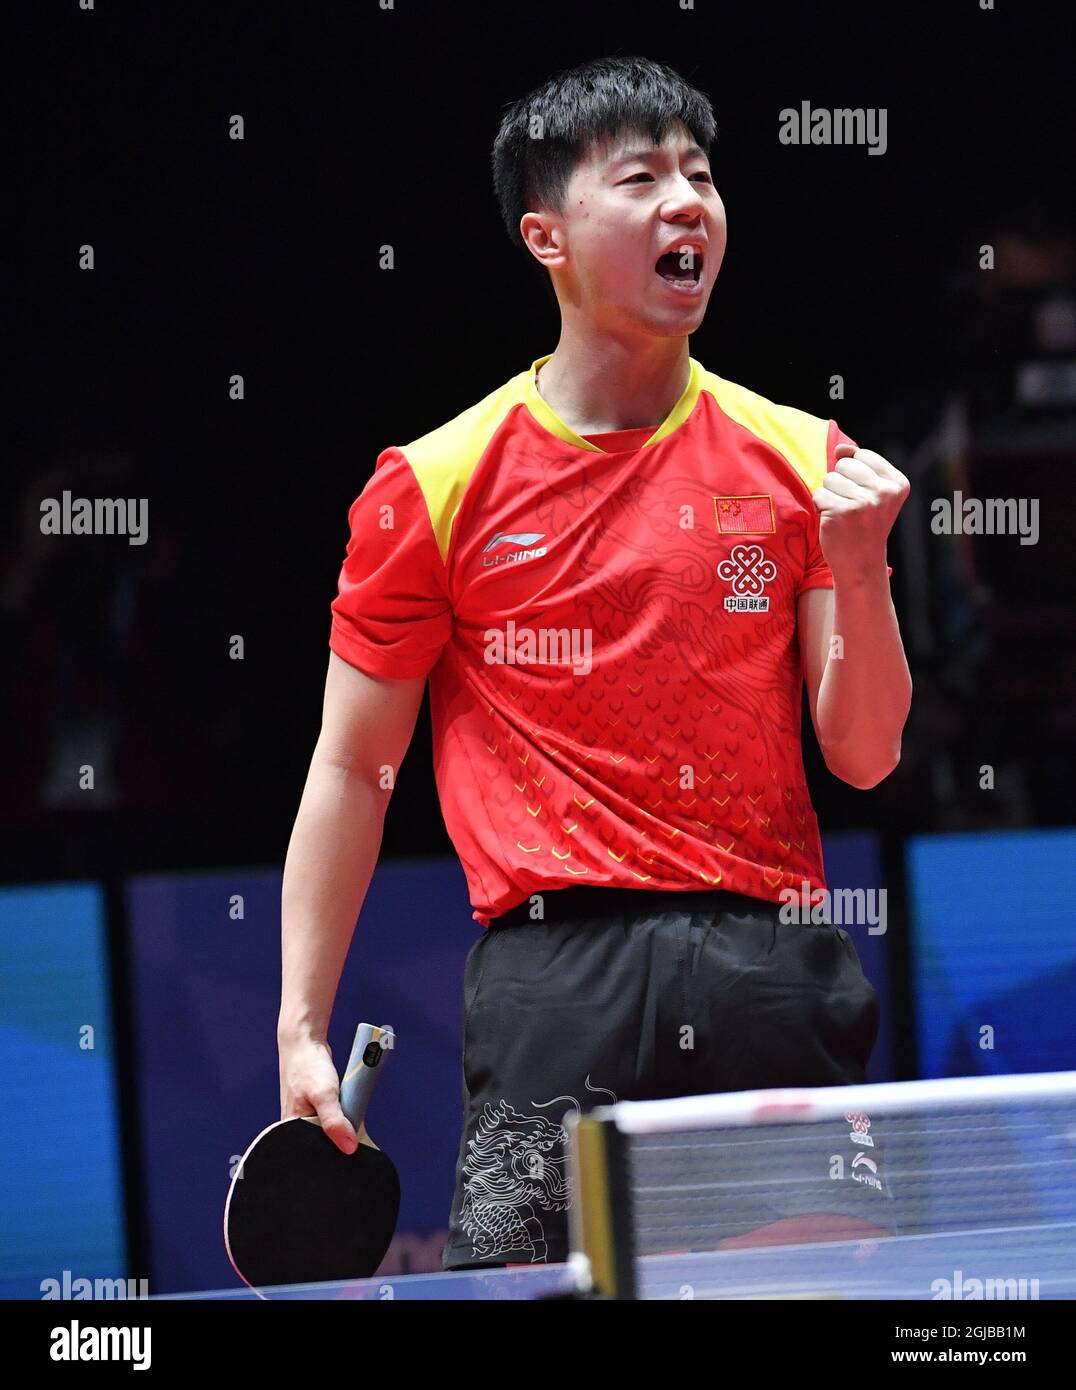 HALMSTAD 20180506 Long Ma of China reacts in the game against Germany's Timo Boll during men's final at the World Team Table Tennis Championships in Halmstad, Sweden Sunday May 6, 2018. Photo: Jonas Ekstromer / TT / kod 10030  Stock Photo